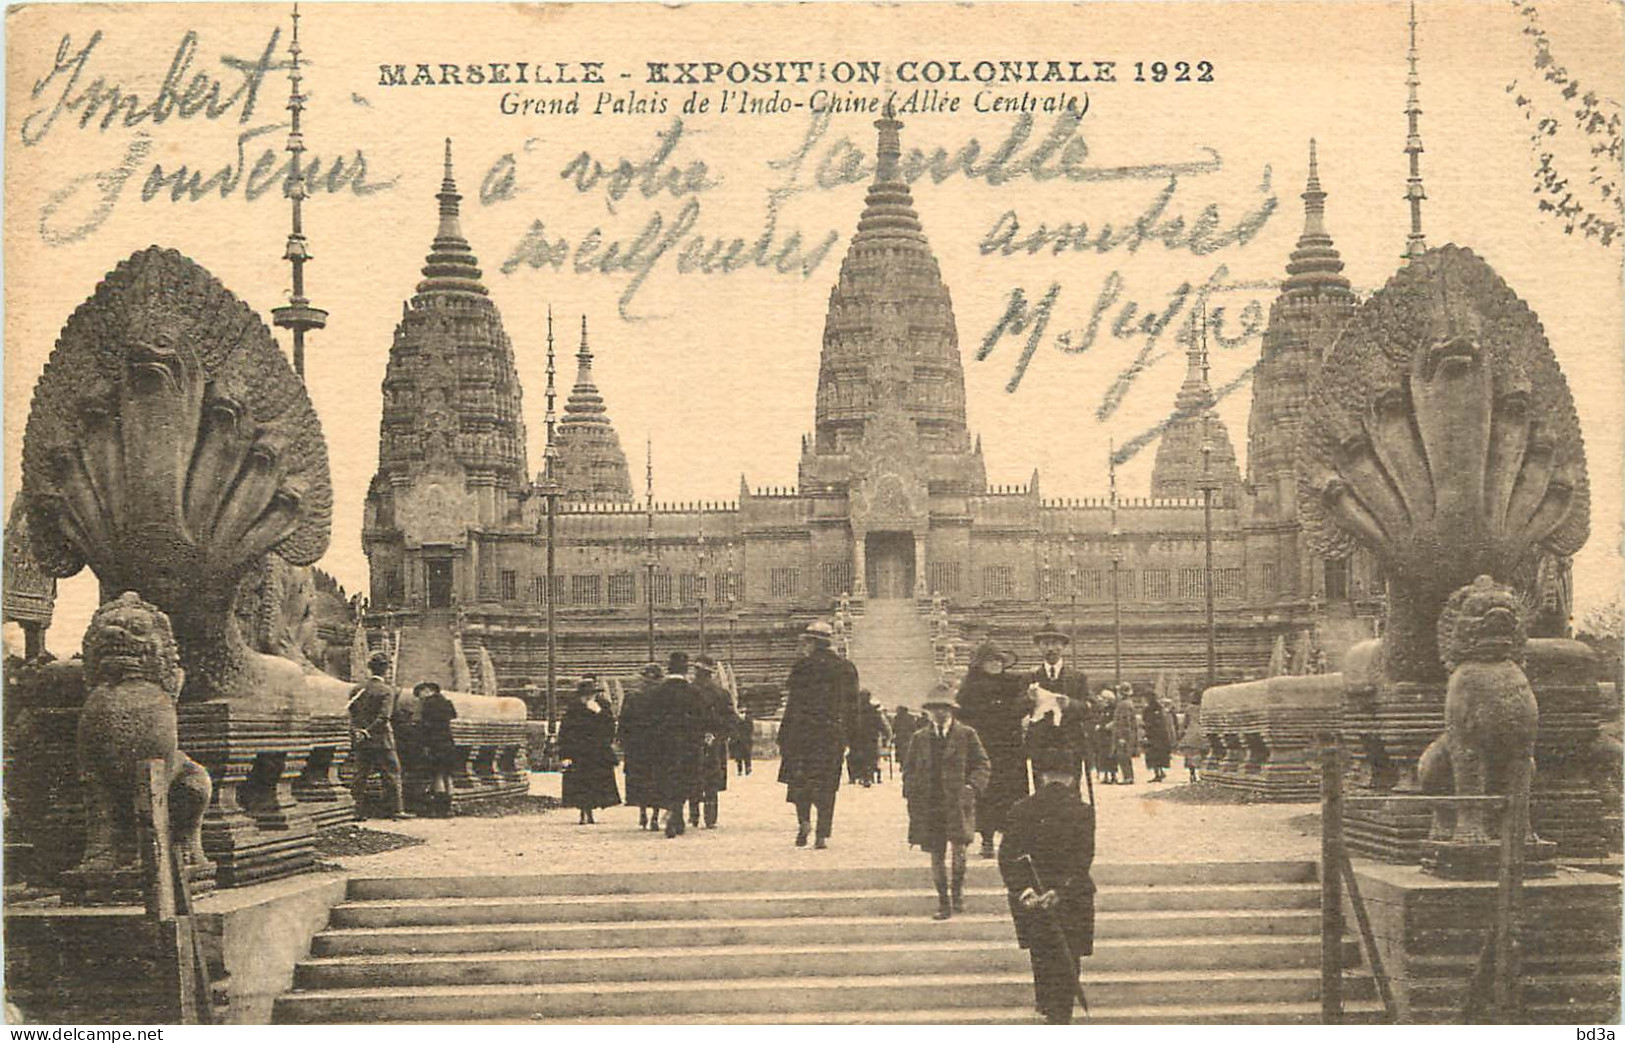 13 - MARSEILLE - EXPOSITION COLONIALE 1922 - GRAND PALAIS DE L'INDO-CHINE - ALLEE CENTRALE - Expositions Coloniales 1906 - 1922